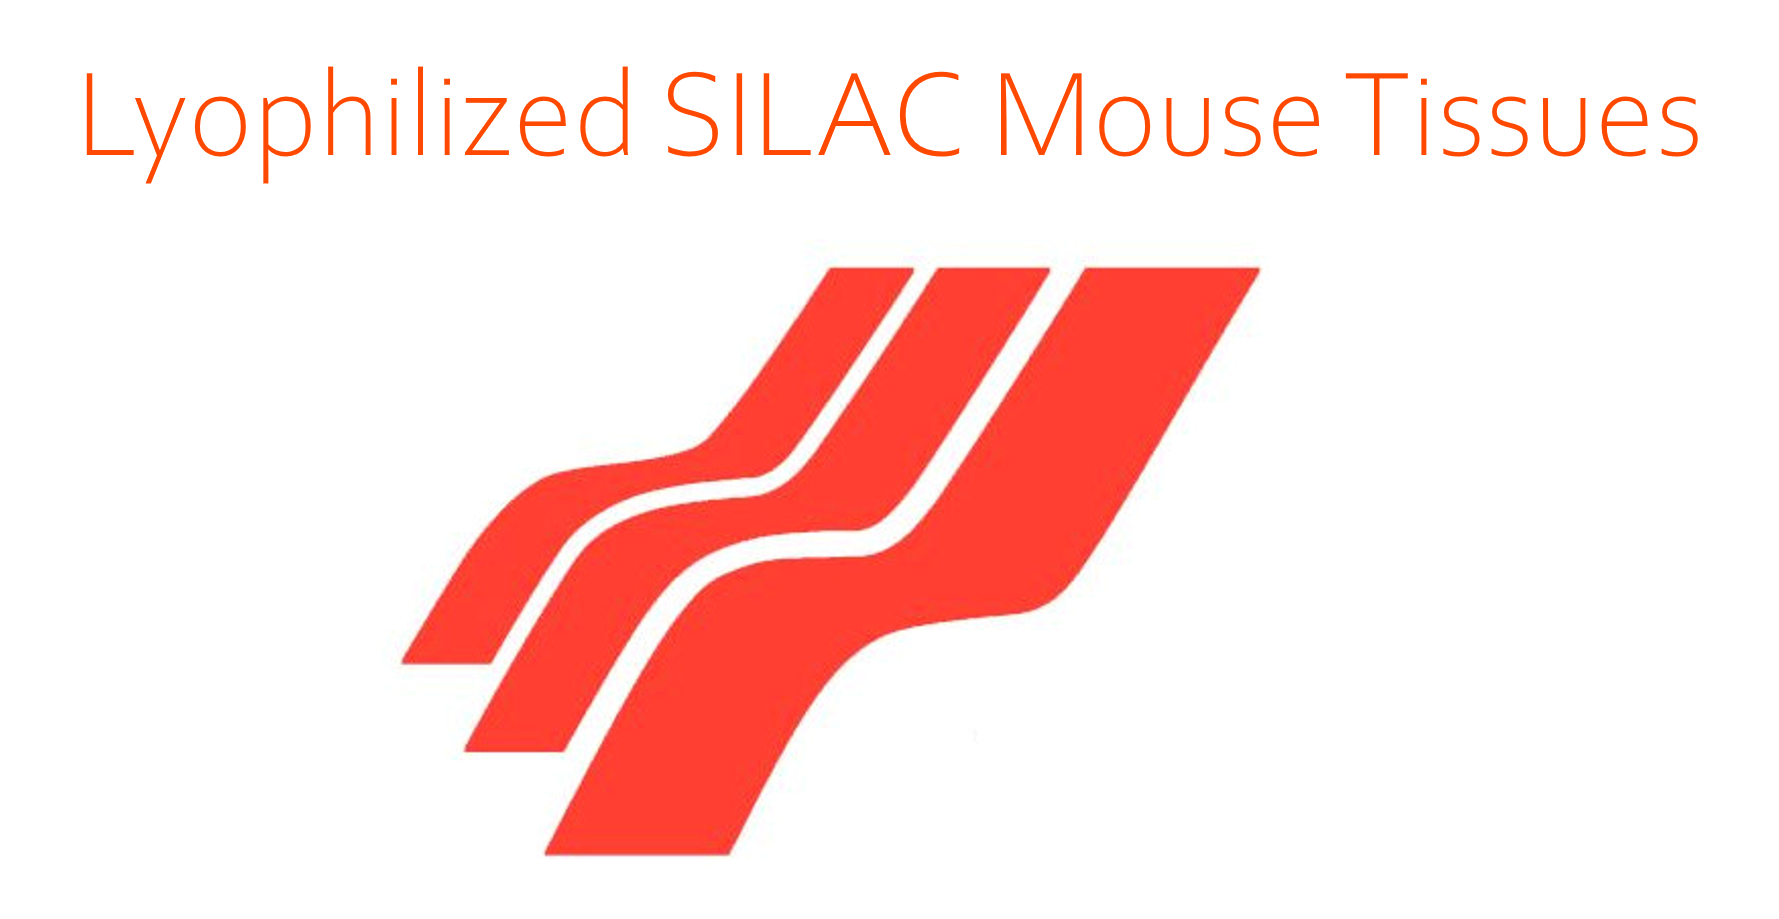 Lyophilized_SILAC_Mouse_Tissues